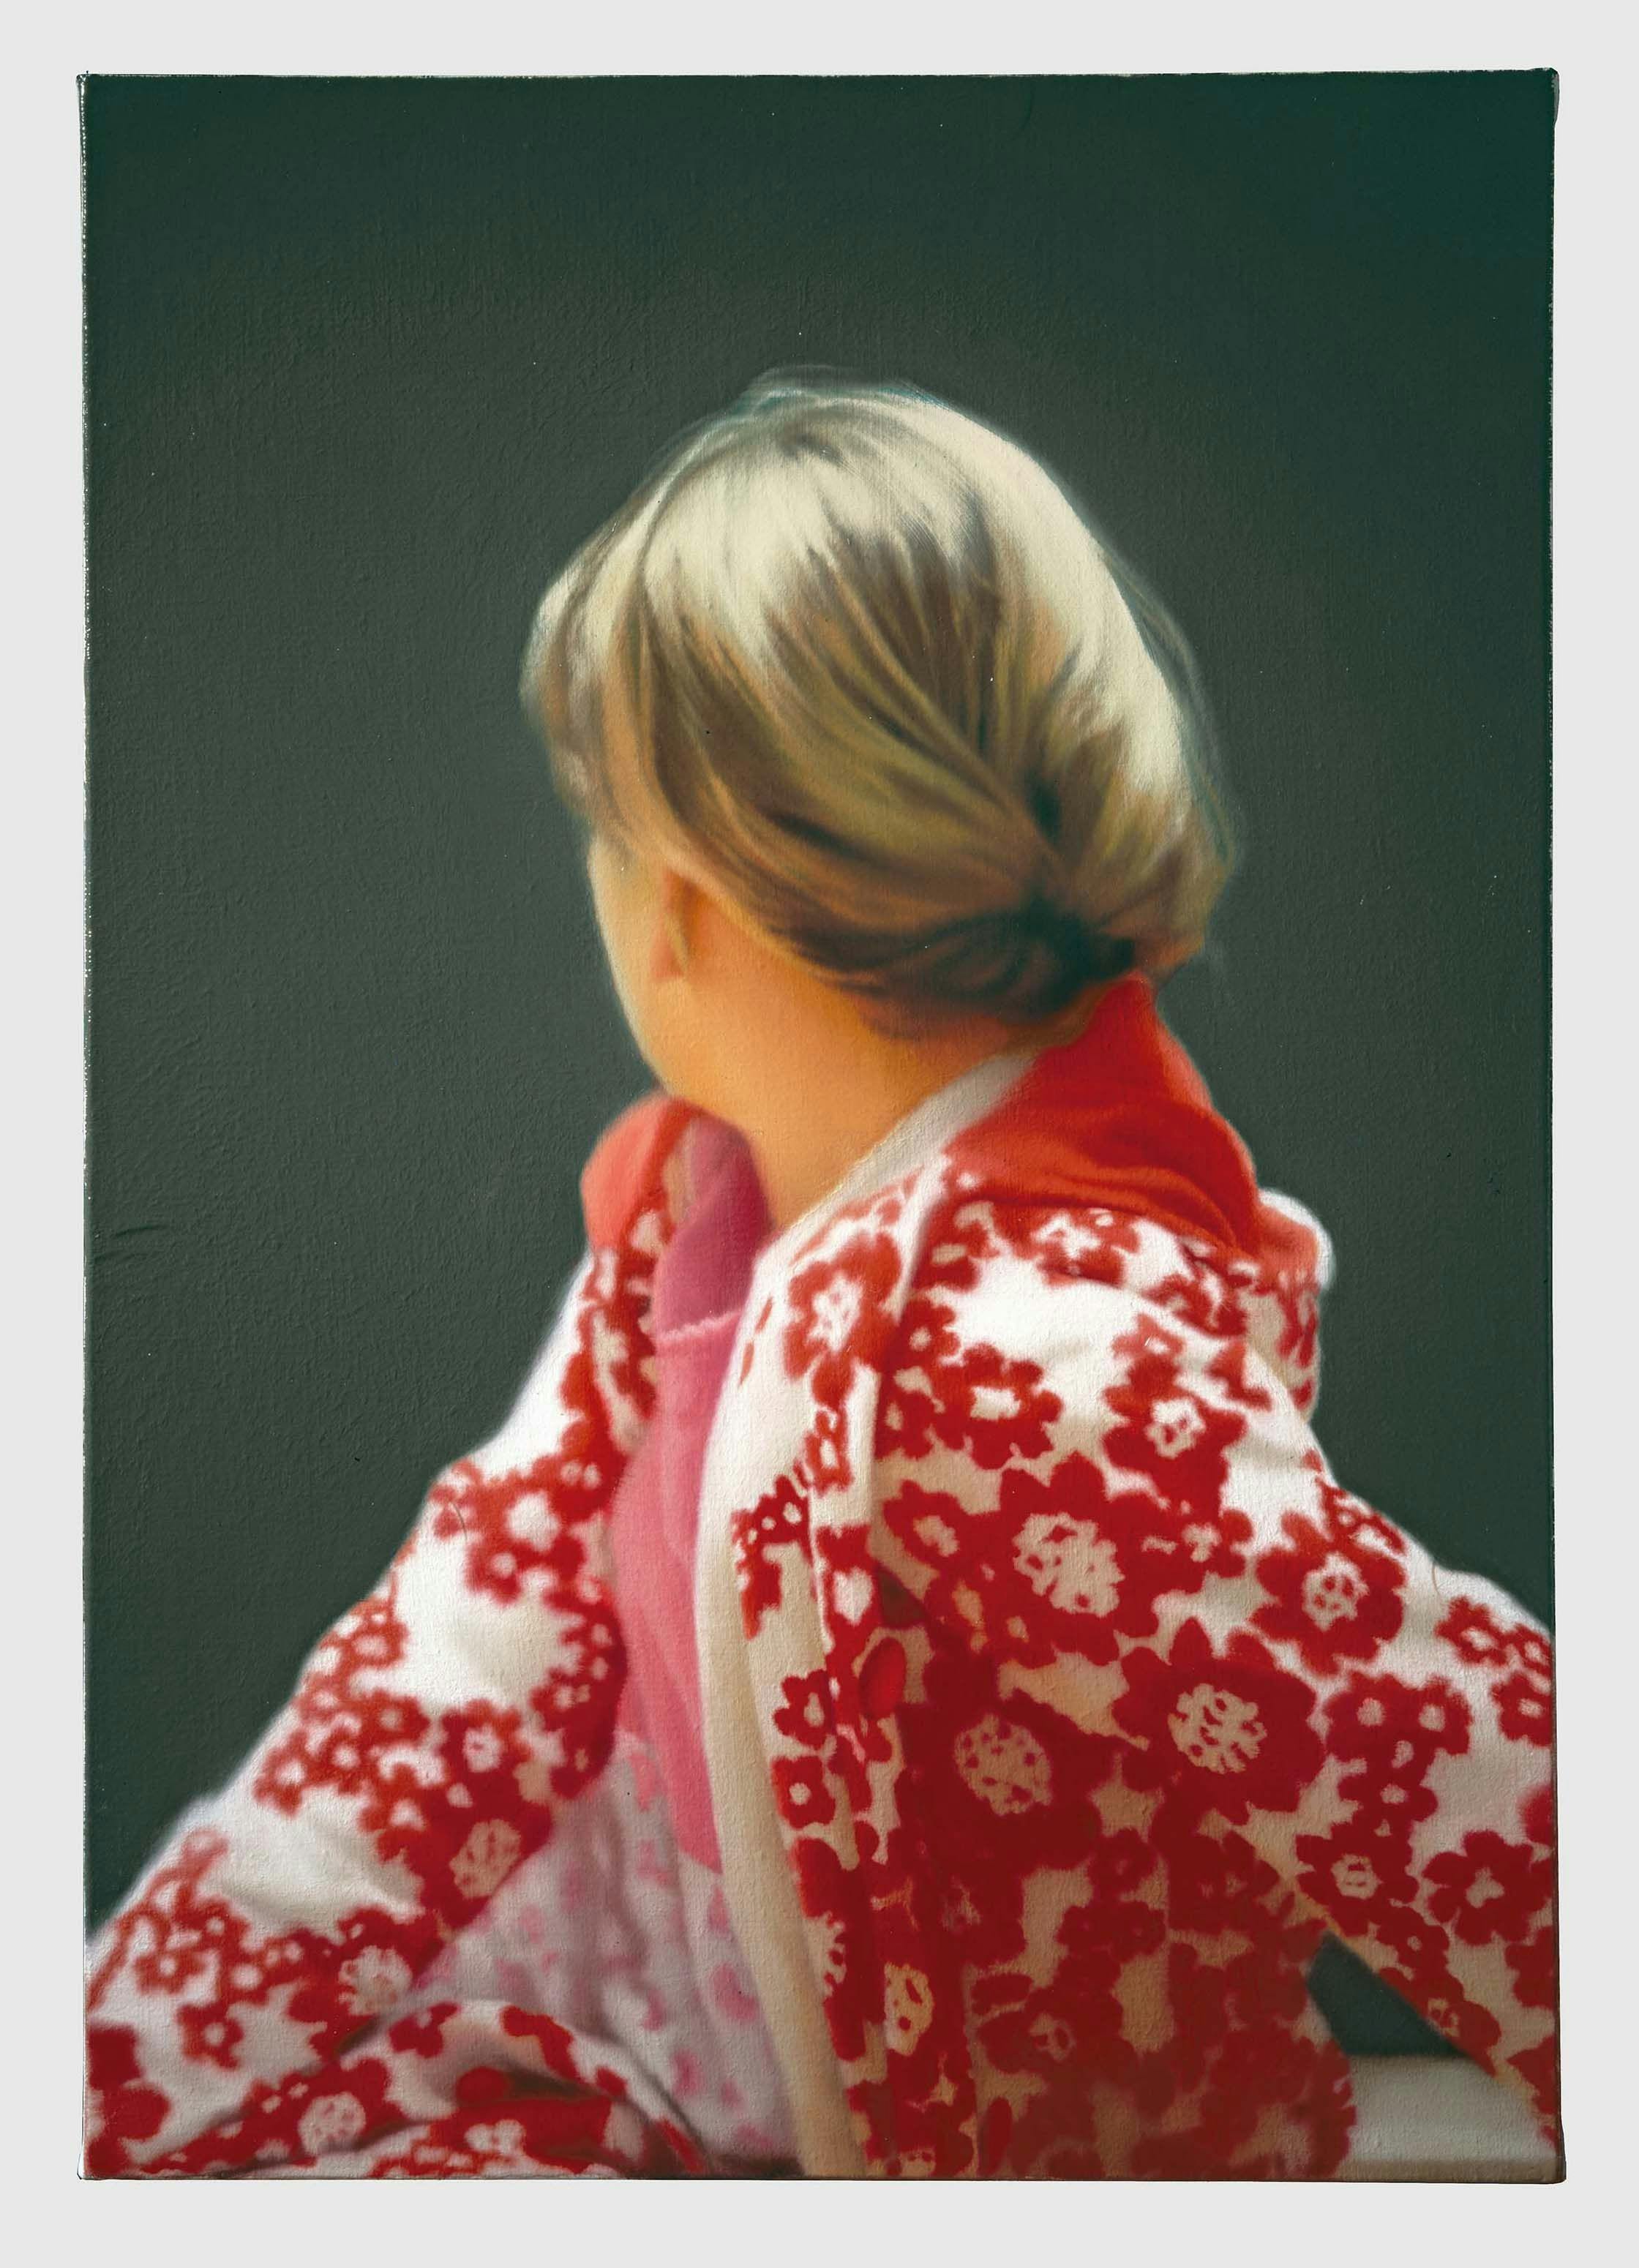 A painting by Gerhard Richter, titled Betty, dated 1988.